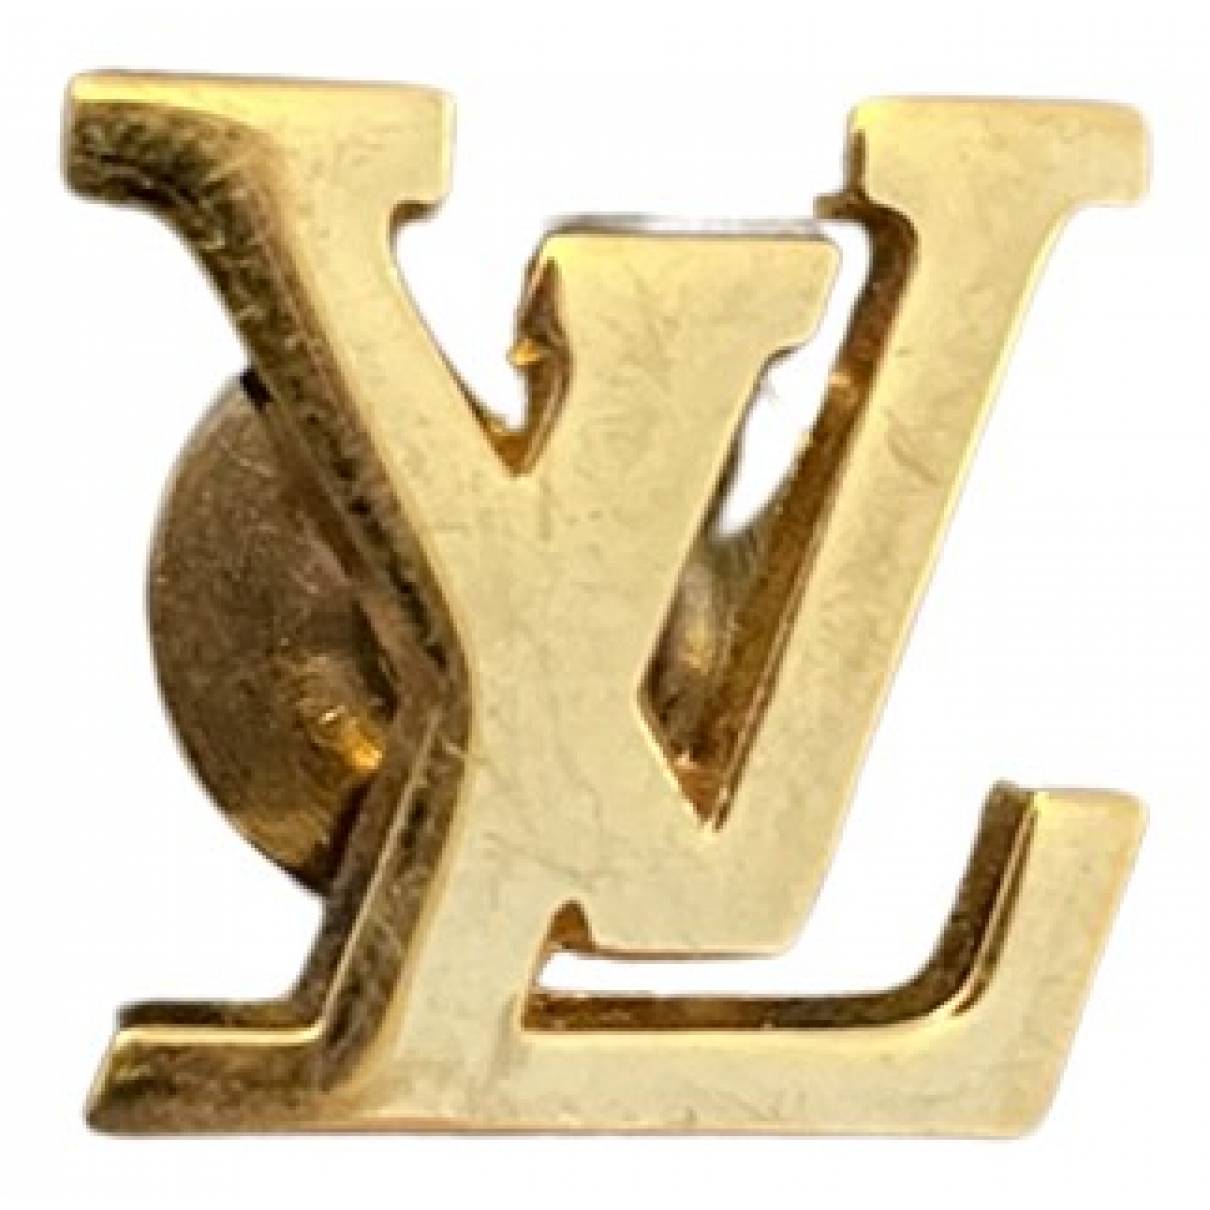 Louis Vuitton Pins and brooches for women  Buy or Sell your Designer  jewellery - Vestiaire Collective